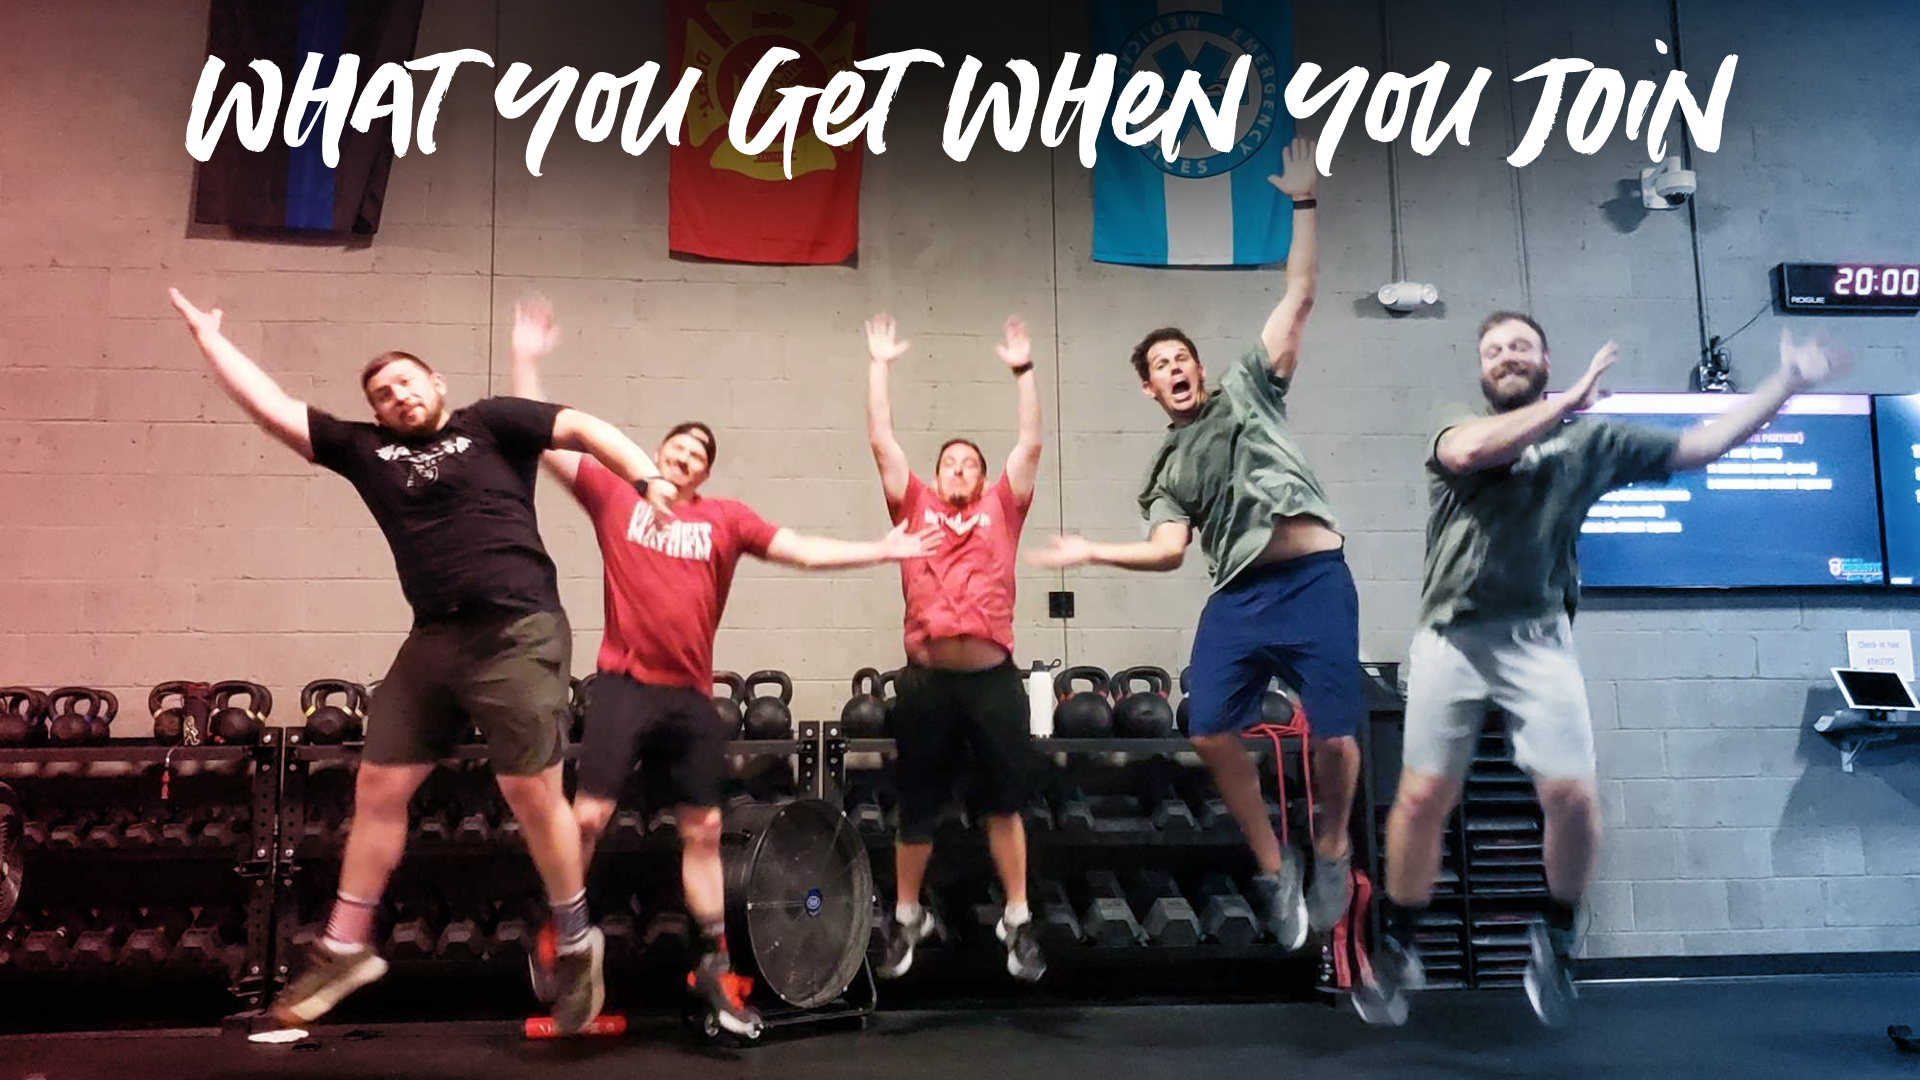 Rewrite your story at Fern Creek CrossFit